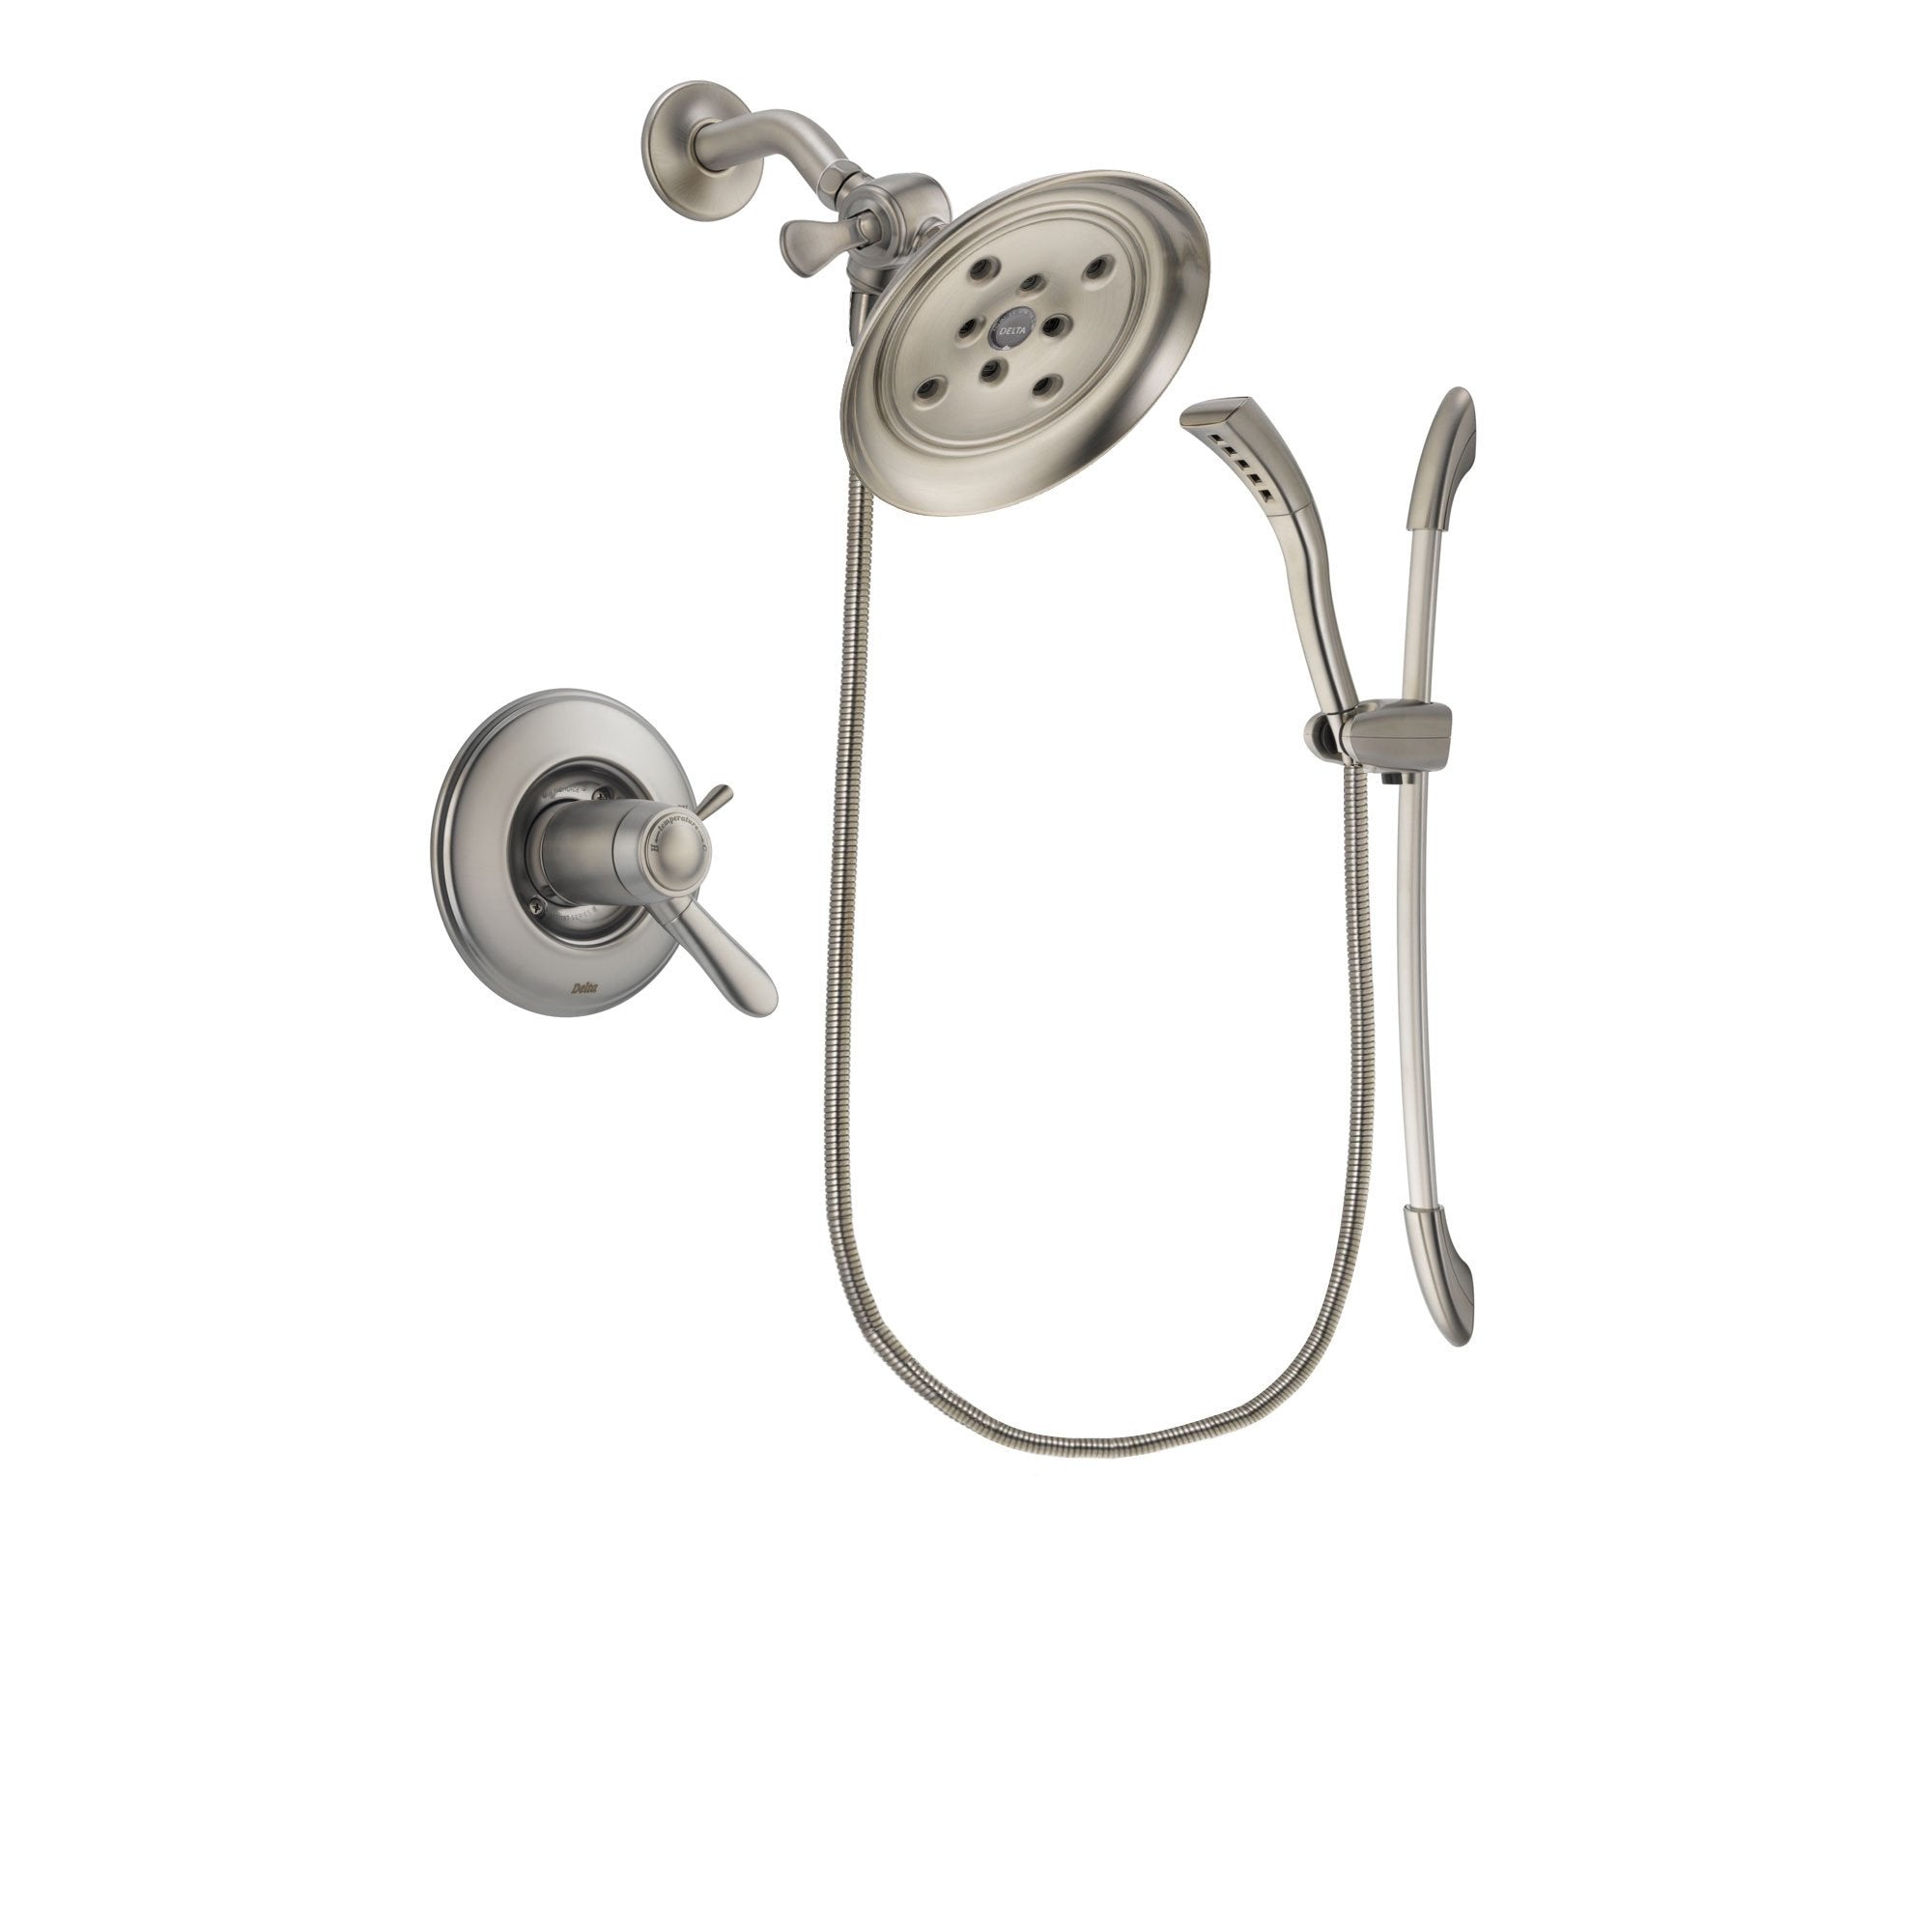 Delta Lahara Stainless Steel Finish Thermostatic Shower Faucet System Package with Large Rain Showerhead and Handshower with Slide Bar Includes Rough-in Valve DSP1446V